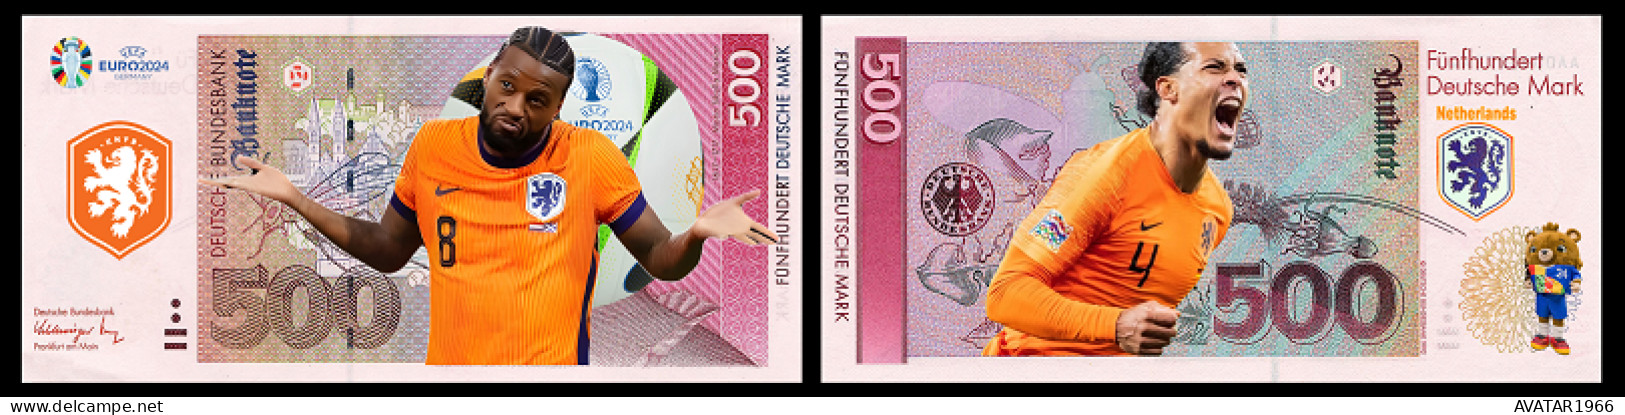 UEFA European Football Championship 2024 qualified country Netherlands 8 pieces Germany fantasy paper money